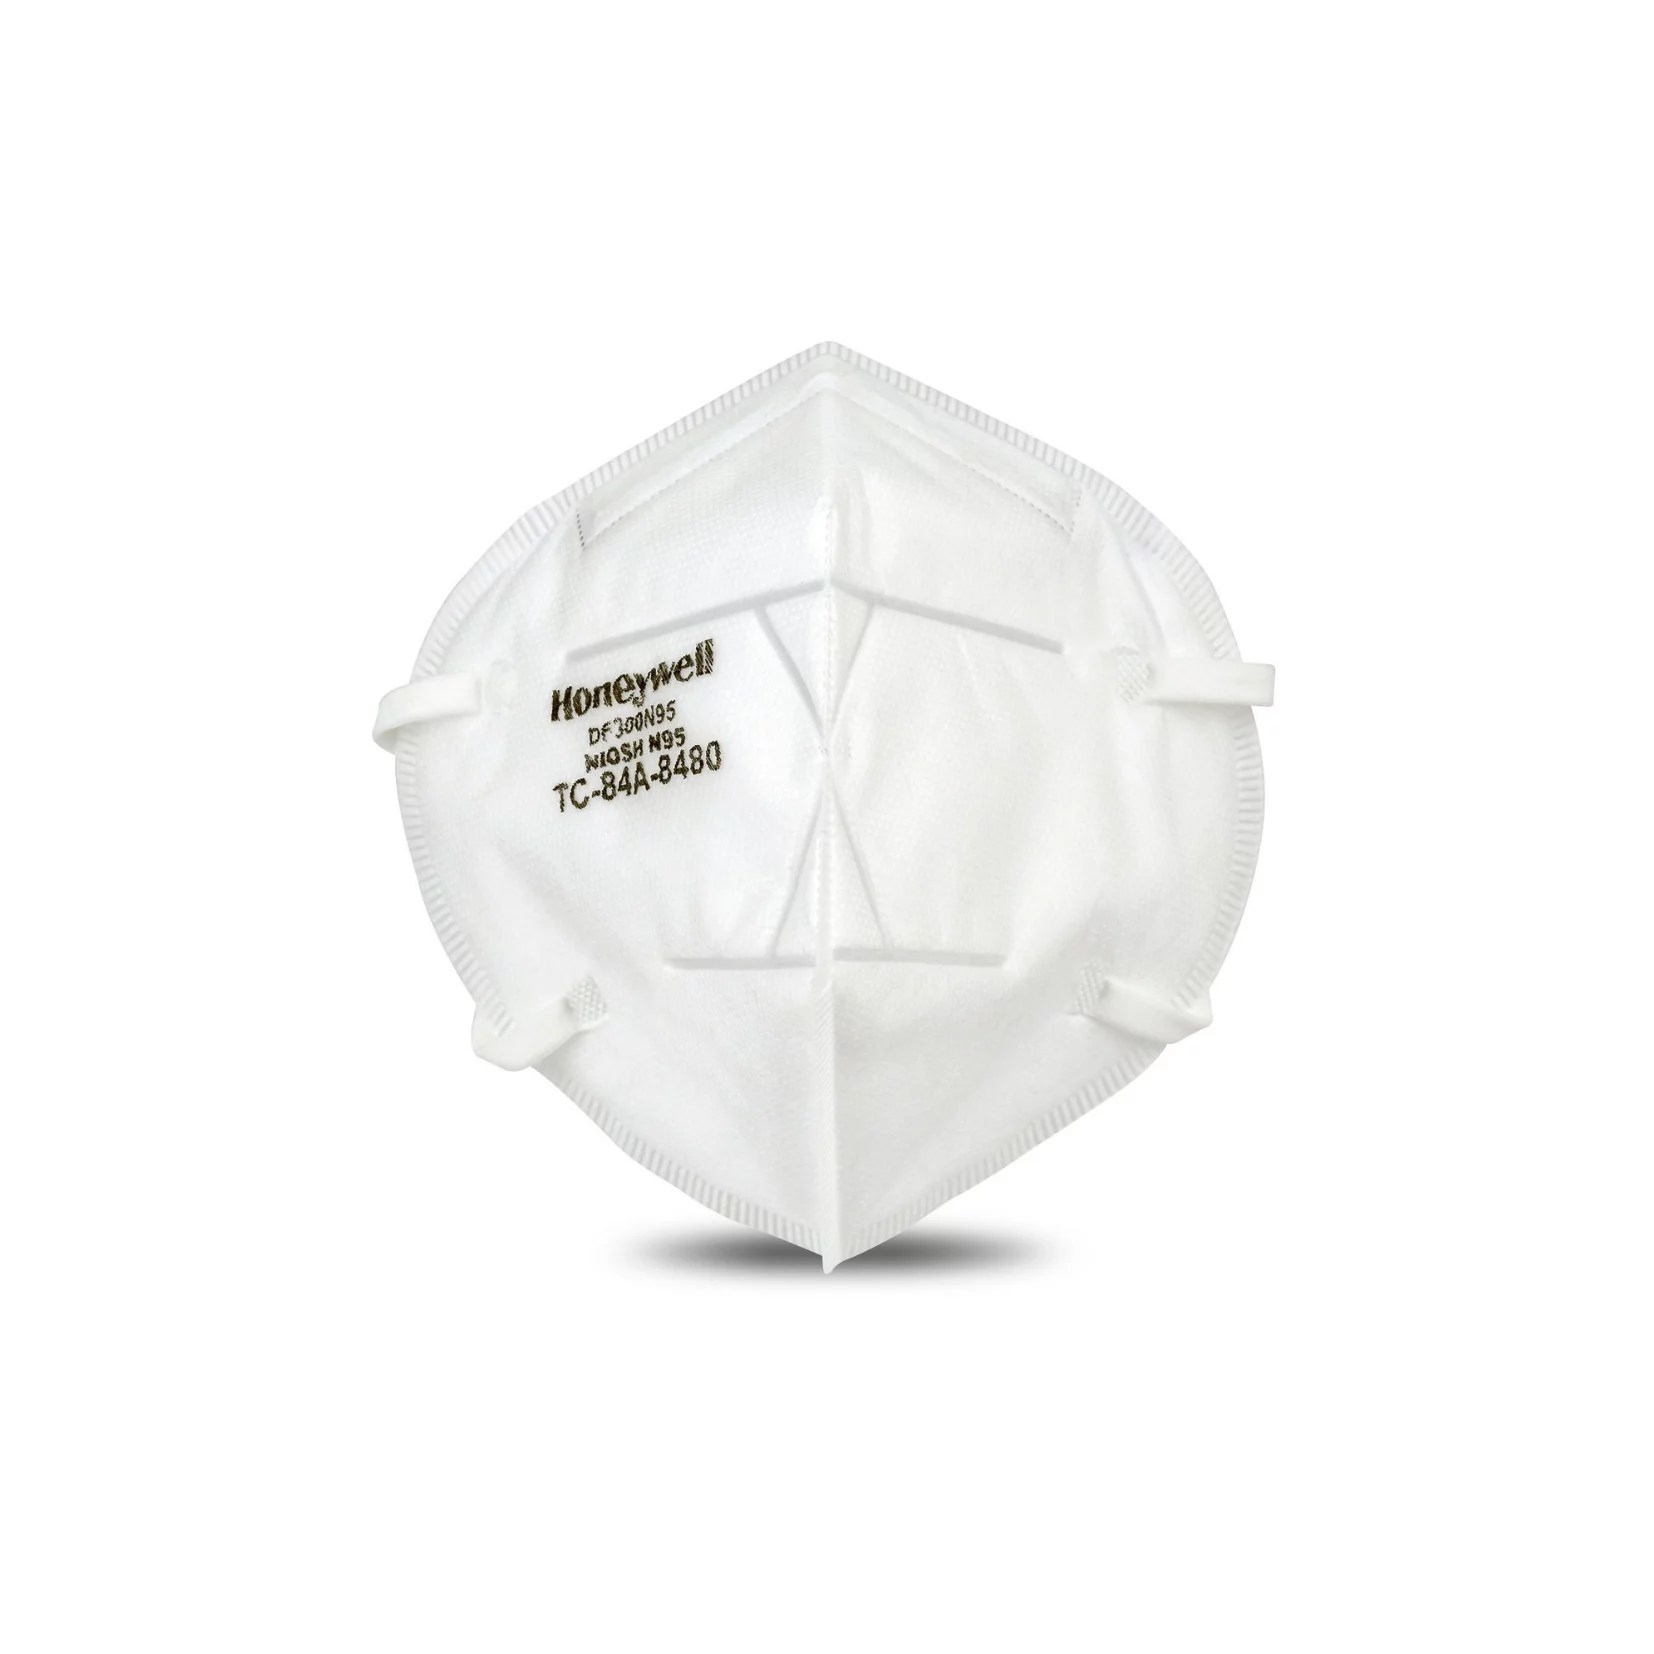 Honeywell DF300H910 N95 Particulate Disposable Respirators